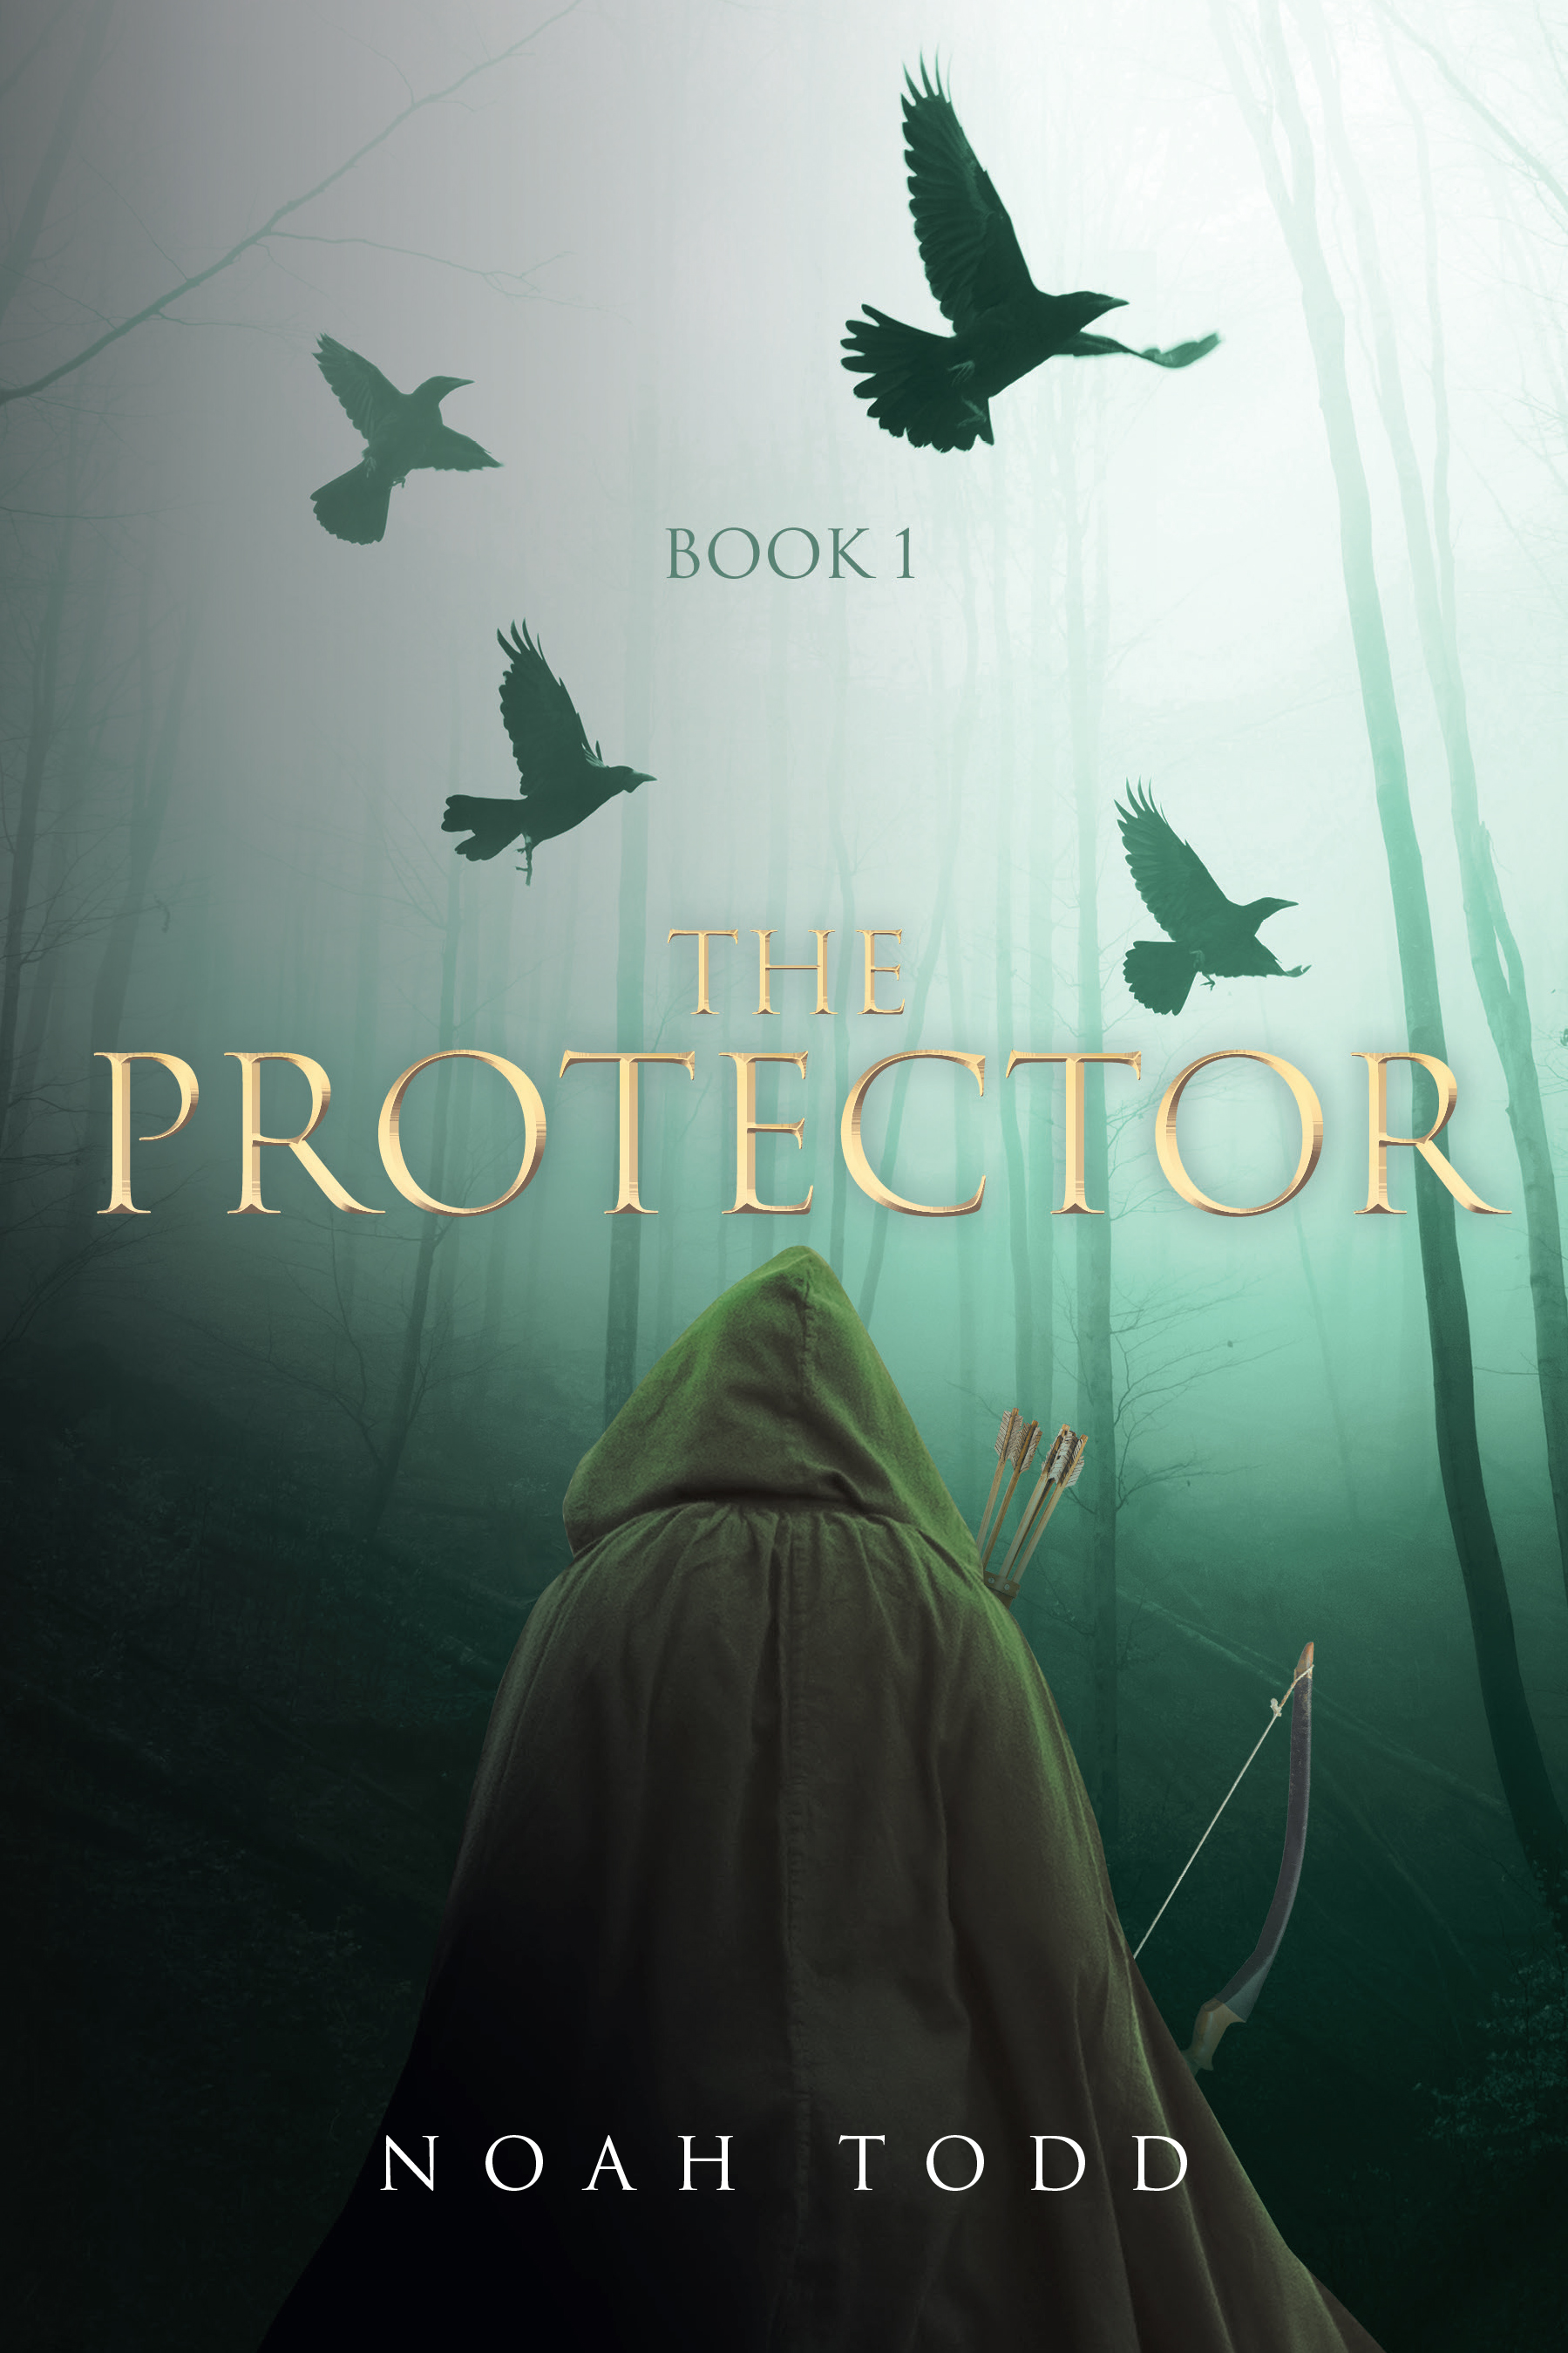 Author Noah Todd’s New Book, "The Protector: Book 1," is a Gripping Fantasy Epic That Follows One Man’s Journey to Protect a Young Girl, Leading to a Life-Changing Quest